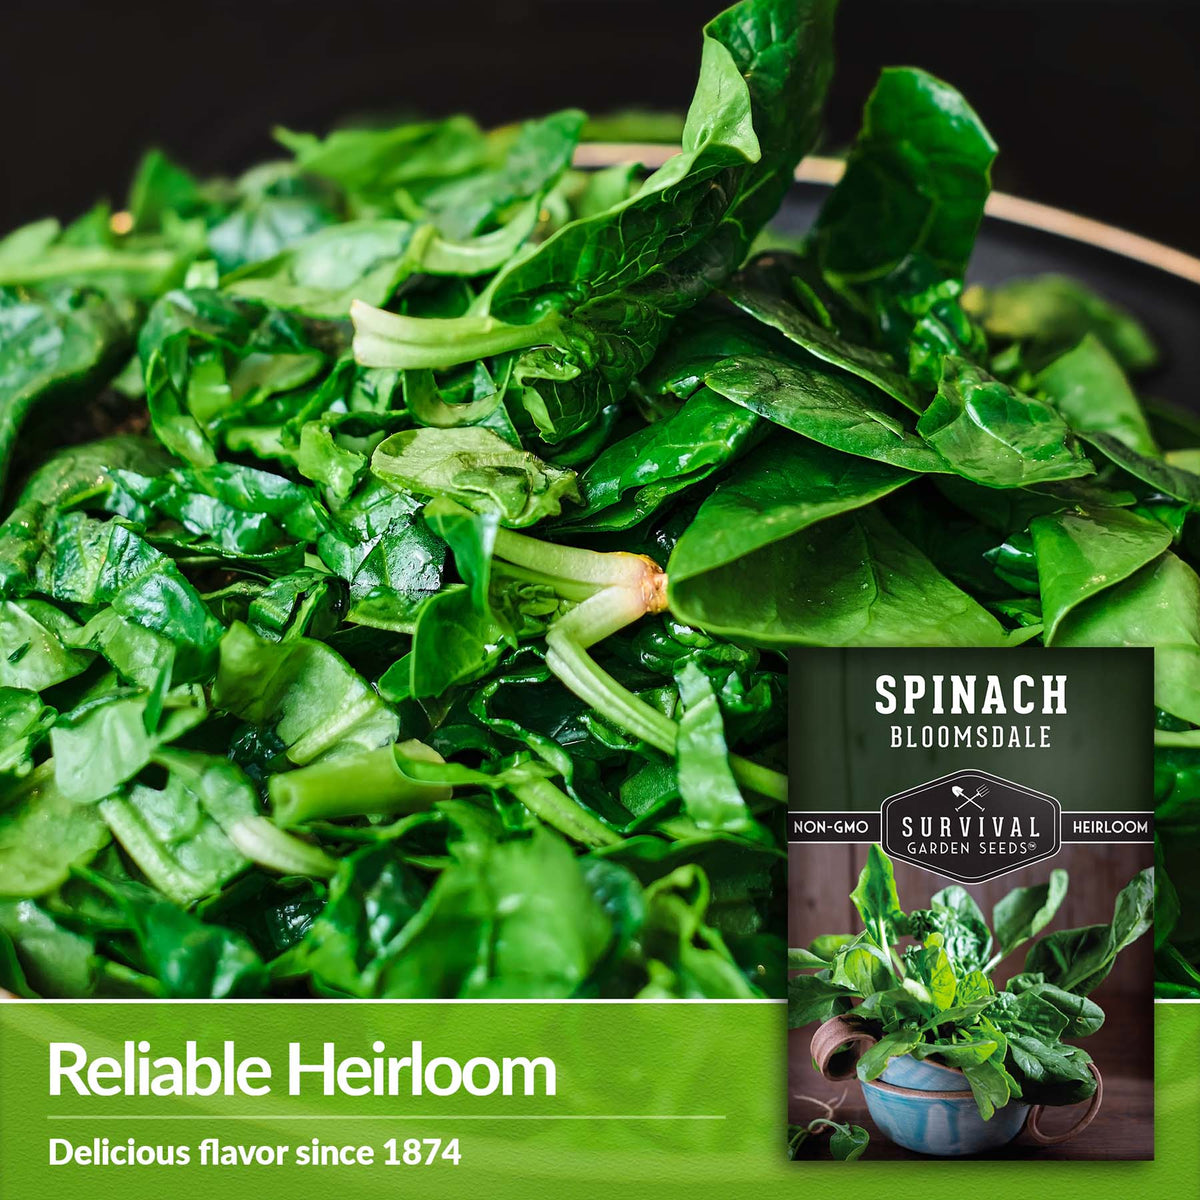 Bloomsdale spinach is a reliable heirloom variety